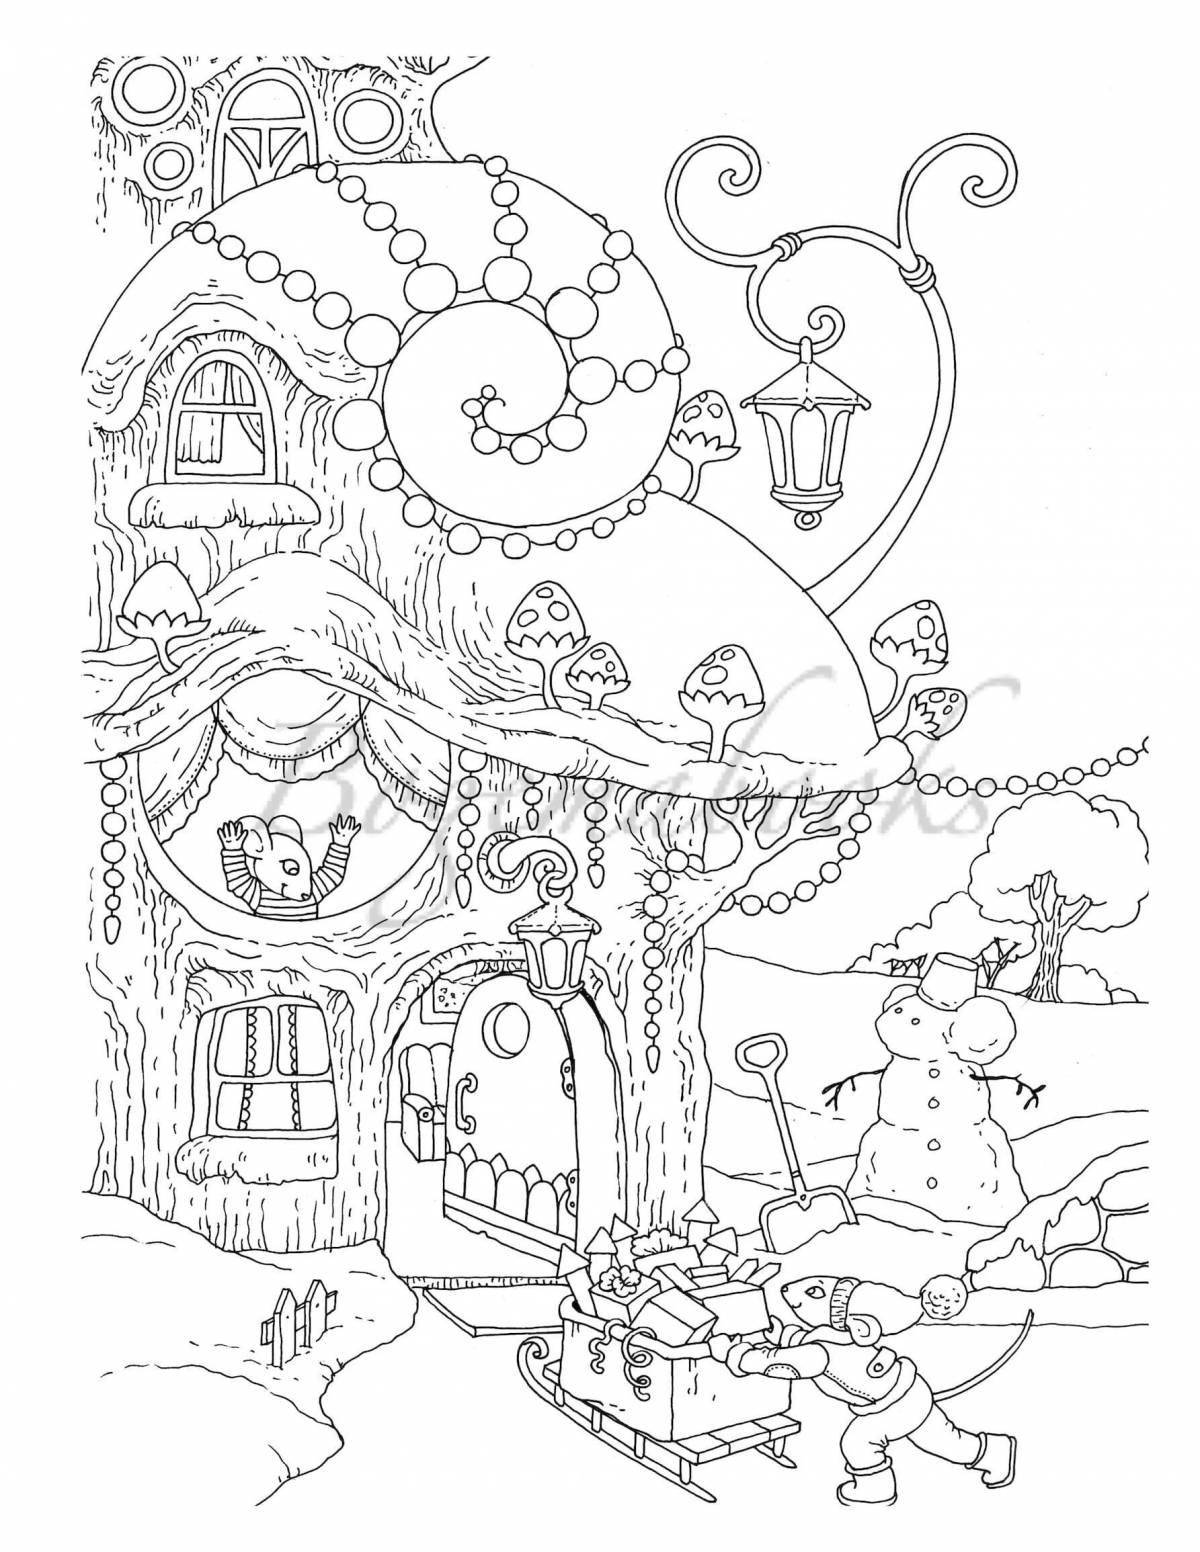 Awesome small town coloring page